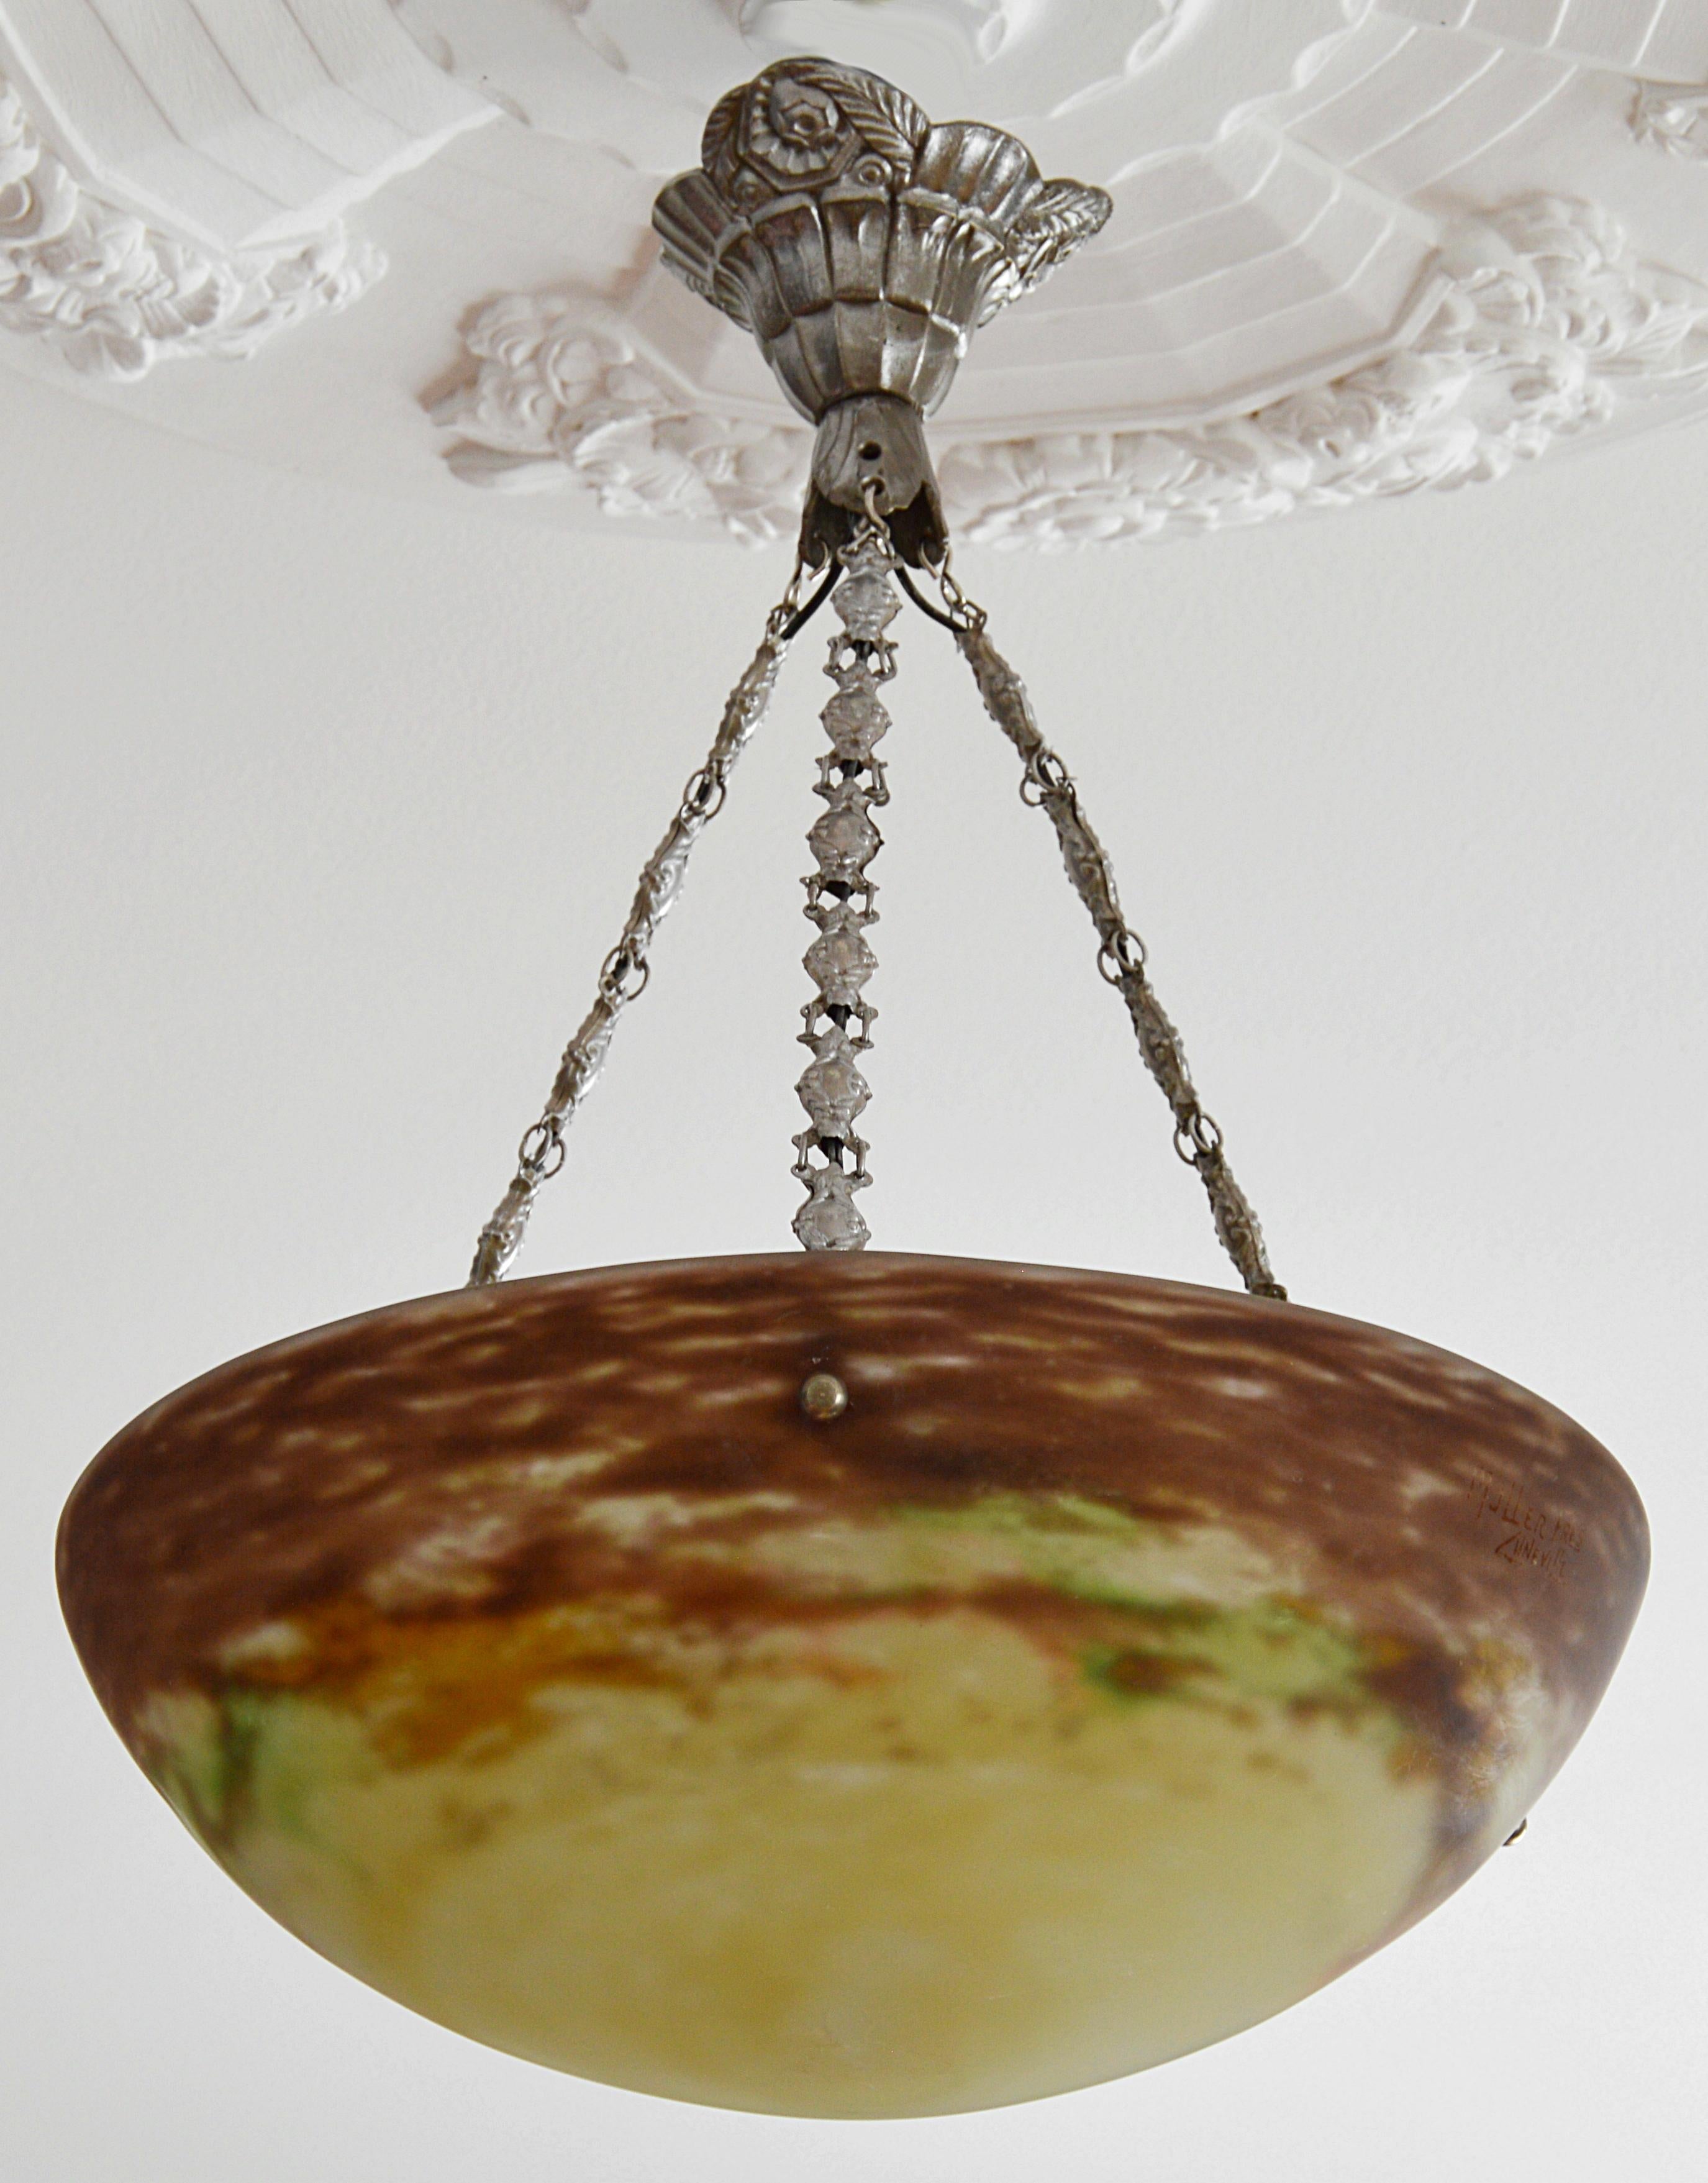 French Art Deco pendant by Muller Freres, Luneville, France, early 1920s. Mottled glass shade, powders are applied between two layers, that comes hung at its original silvered bronze (canopy and hidden-holes) and brass (chains) fixture. Signed